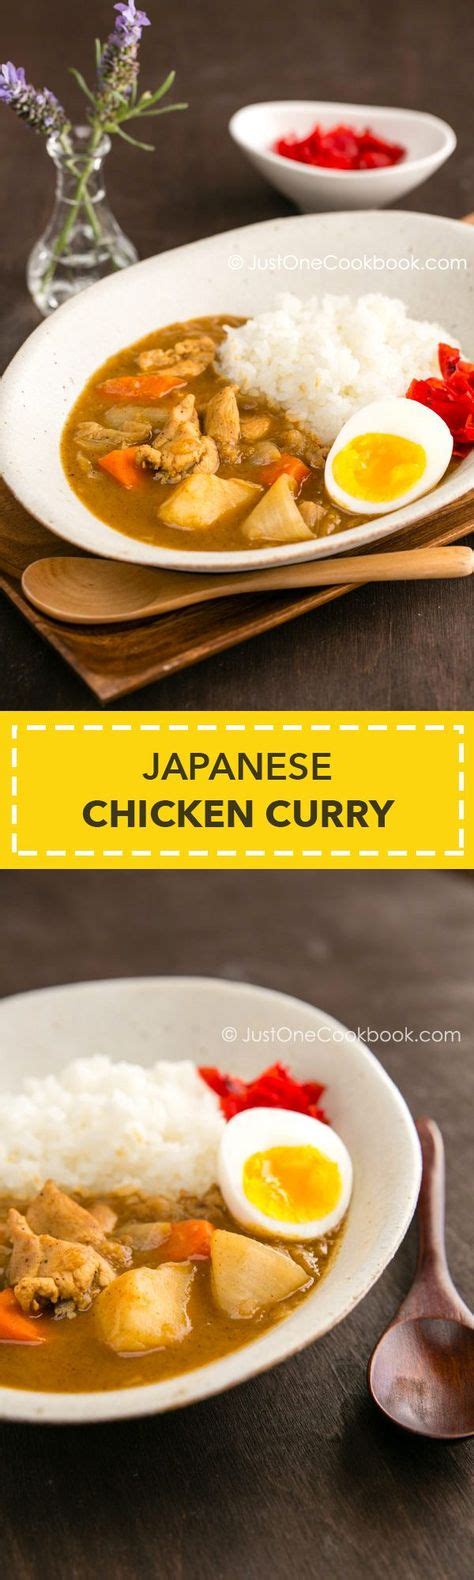 japanese chicken curry recipe curry recipes japanese chicken curry